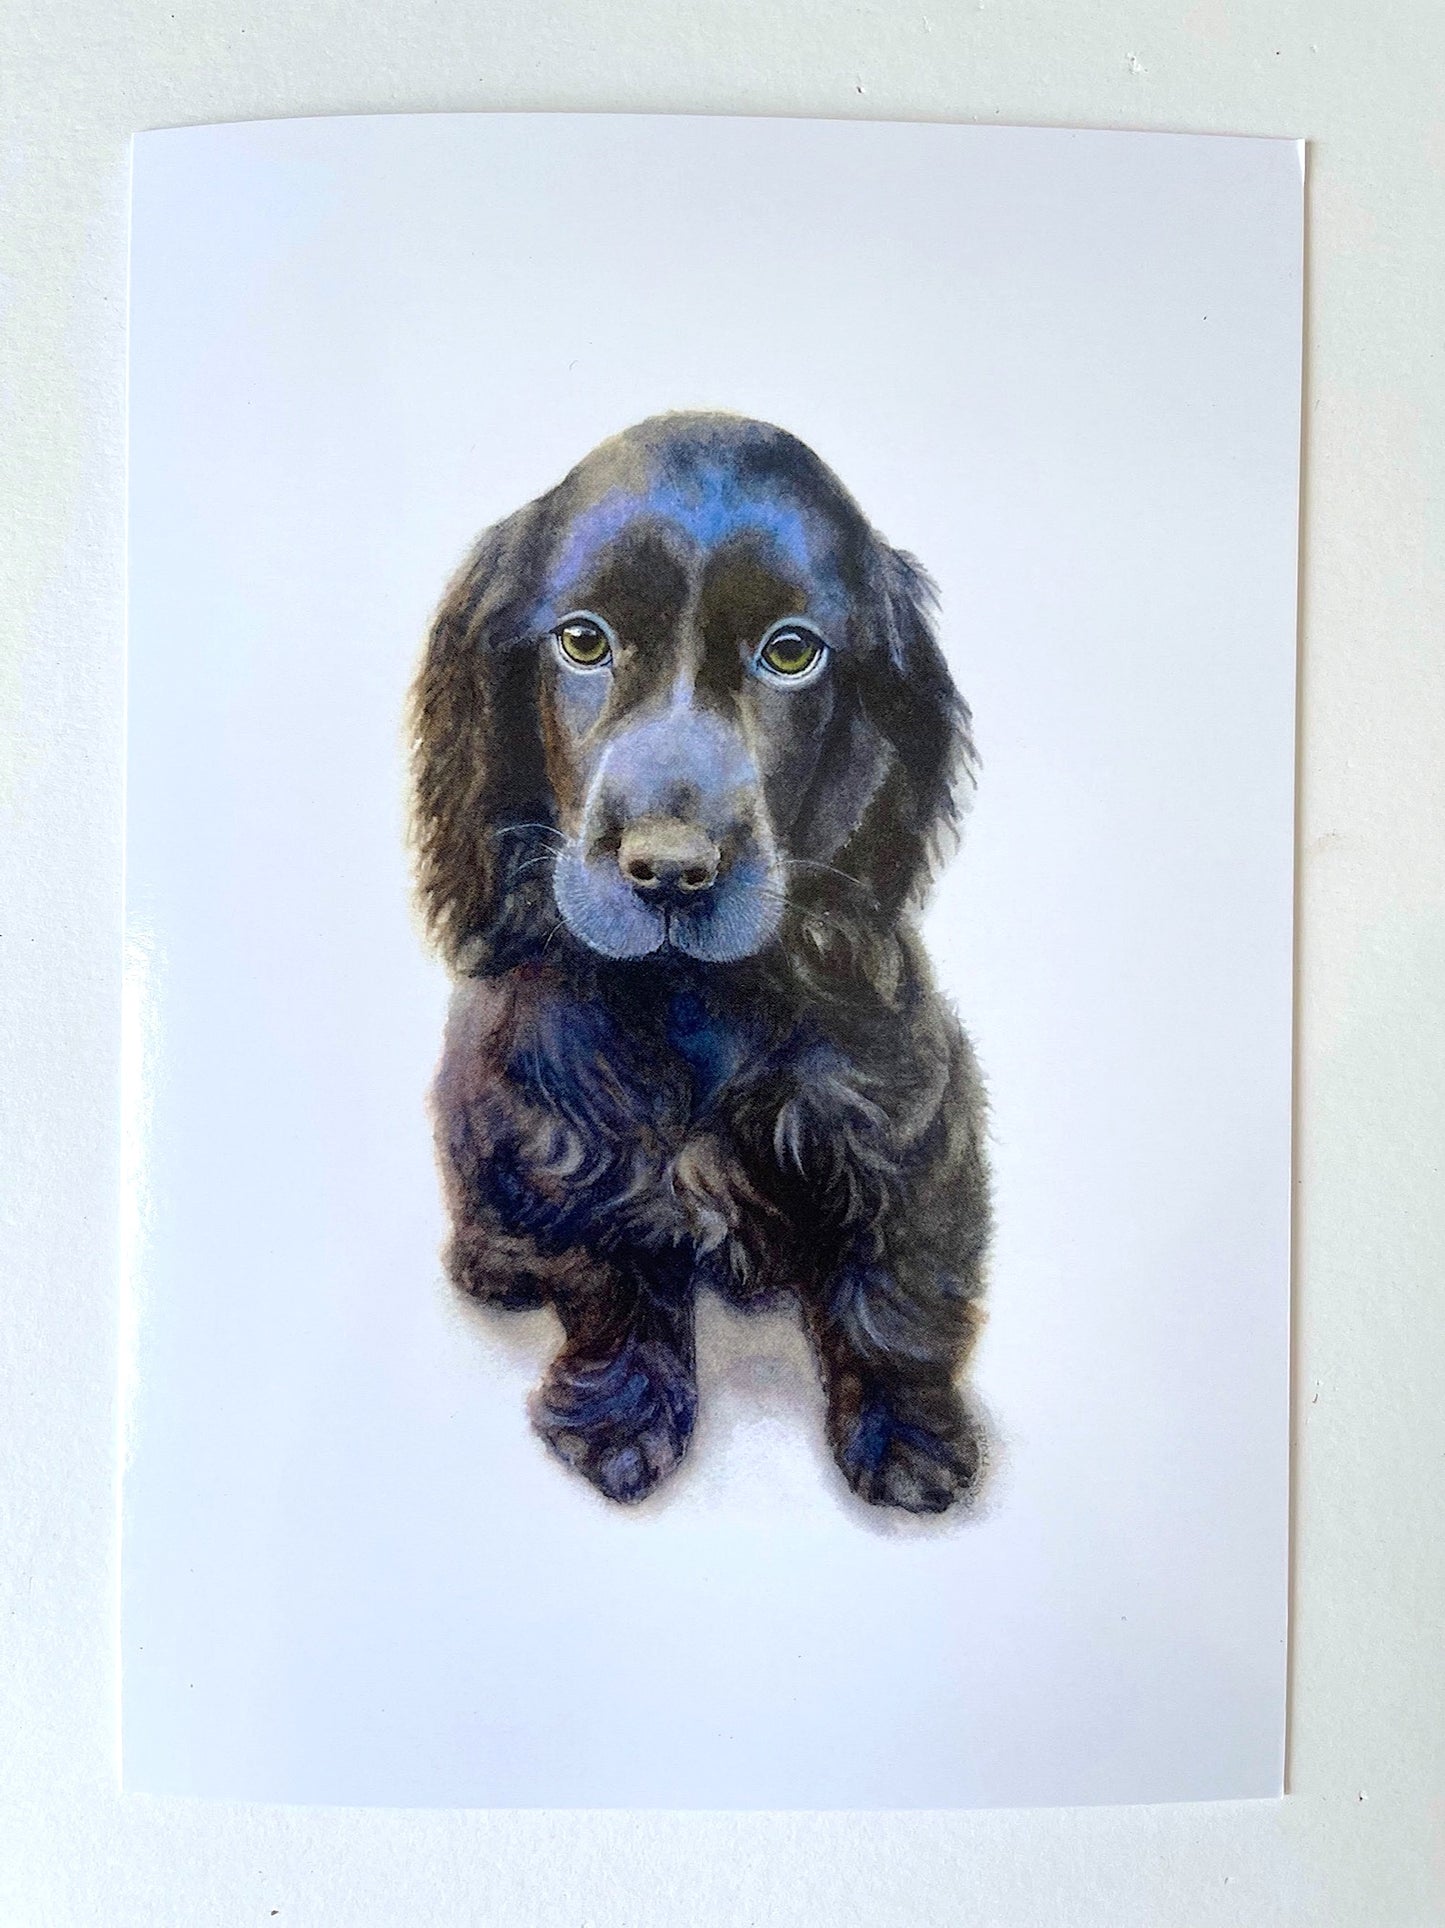 A black Cocker Spaniel puppy sits staring out at the viewer. Set against a plain white background the ruffles of fur and blue sheen of its shiny coat make him irresistible.